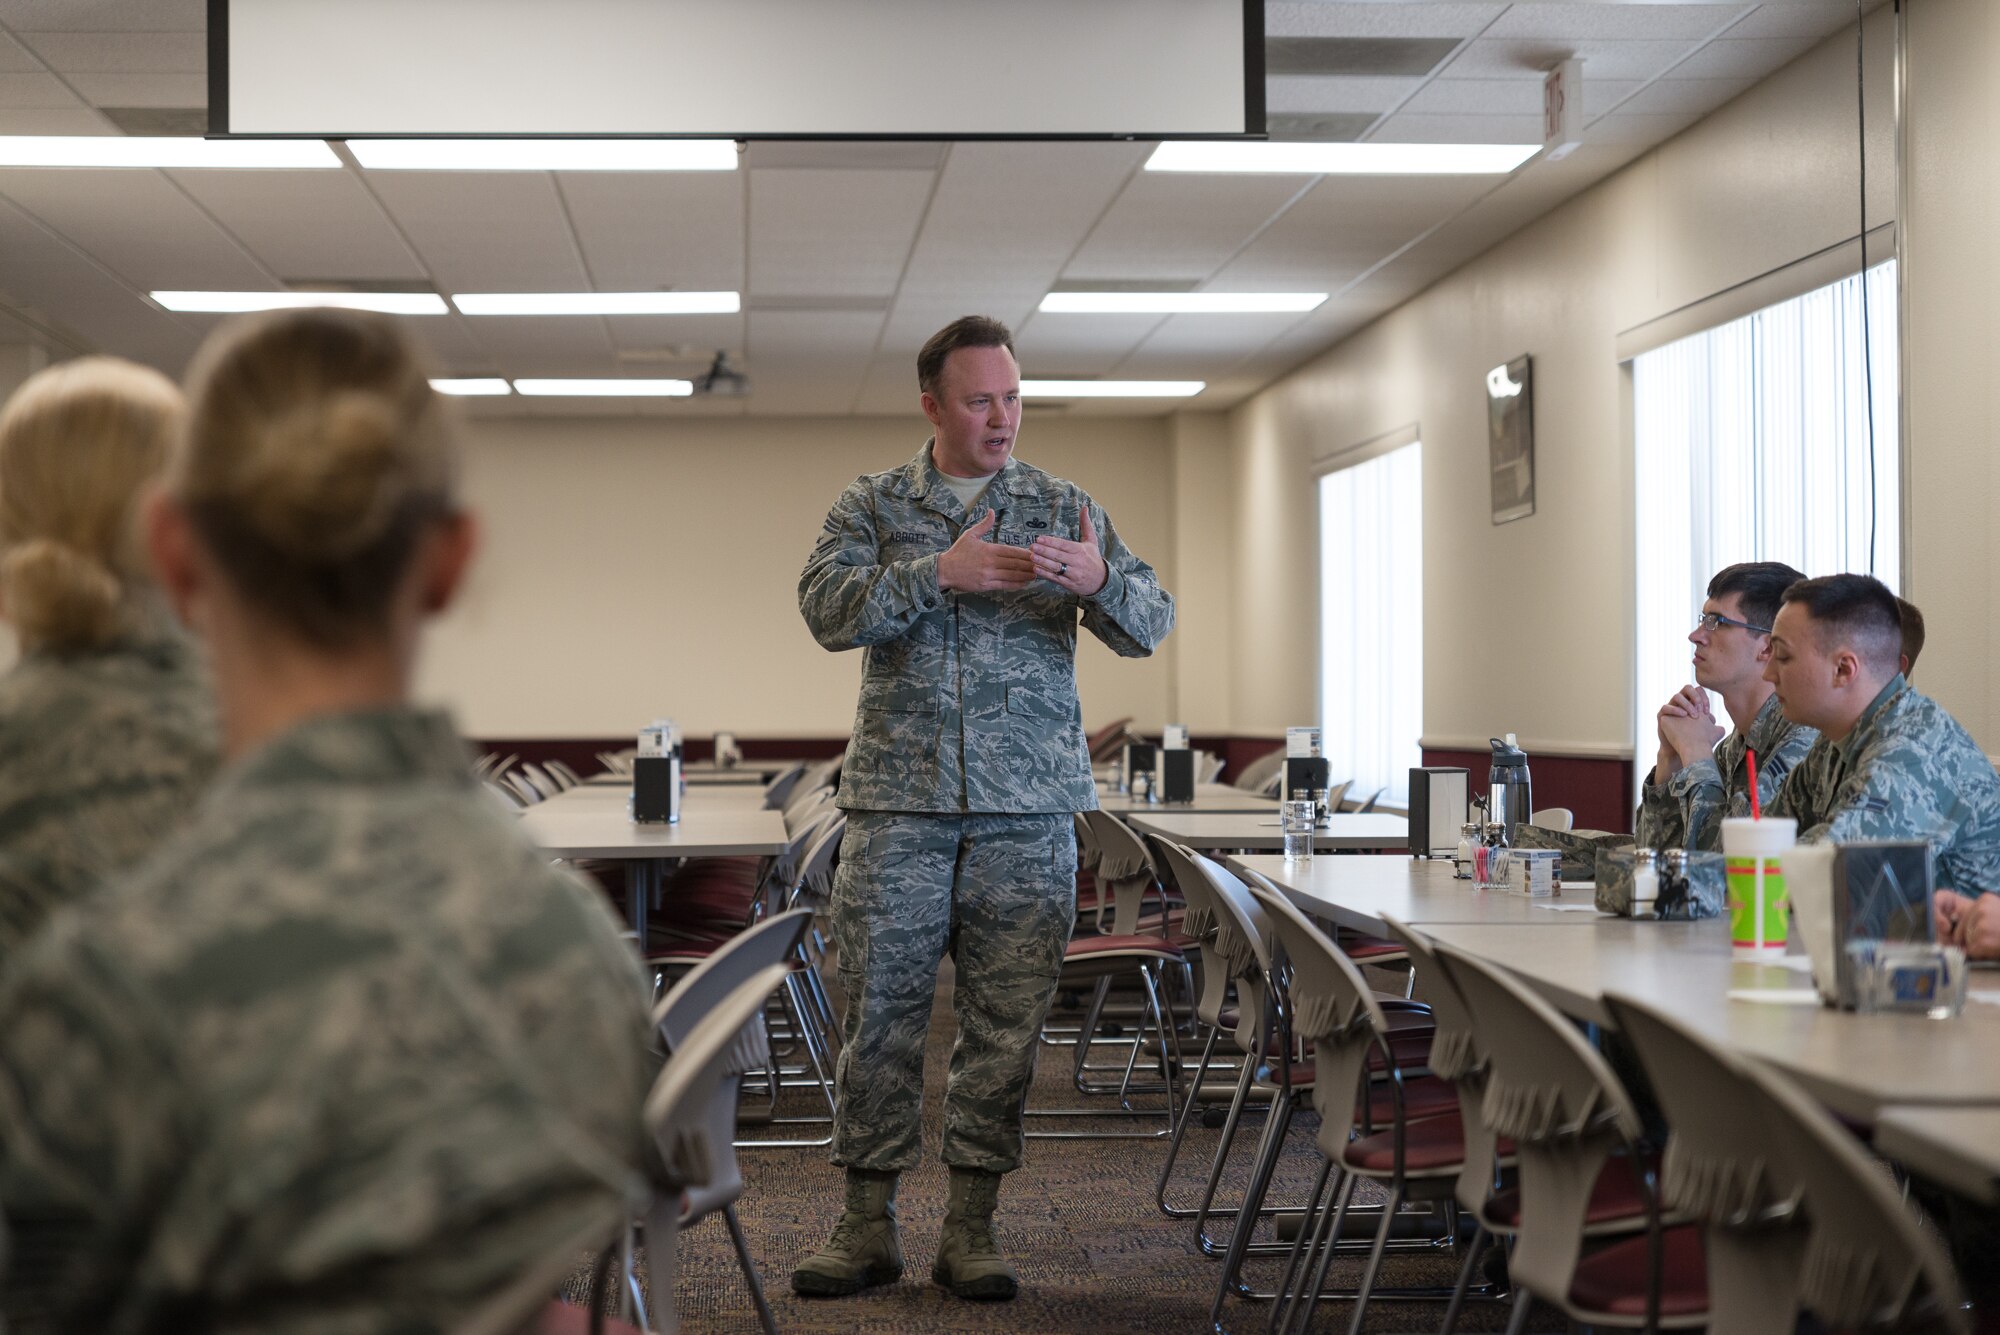 153rd Airlift Wing Command Chief Master Sgt. Michael D. Abbott spoke to about 20 enlisted members of the Rising 6 organization on the topic of managing a successful career in the Air National Guard, Mar. 7, 2015 at Cheyenne Air National Guard Base in Cheyenne, Wyoming. Rising 6 members consist of Airman in the ranks of Airman Basic to Tech. Sgt. who inform leaders of issues which impact involving Airmen and noncommissioned officers. (U.S. Air National Guard photo by Tech. Sgt. Galvin/released)